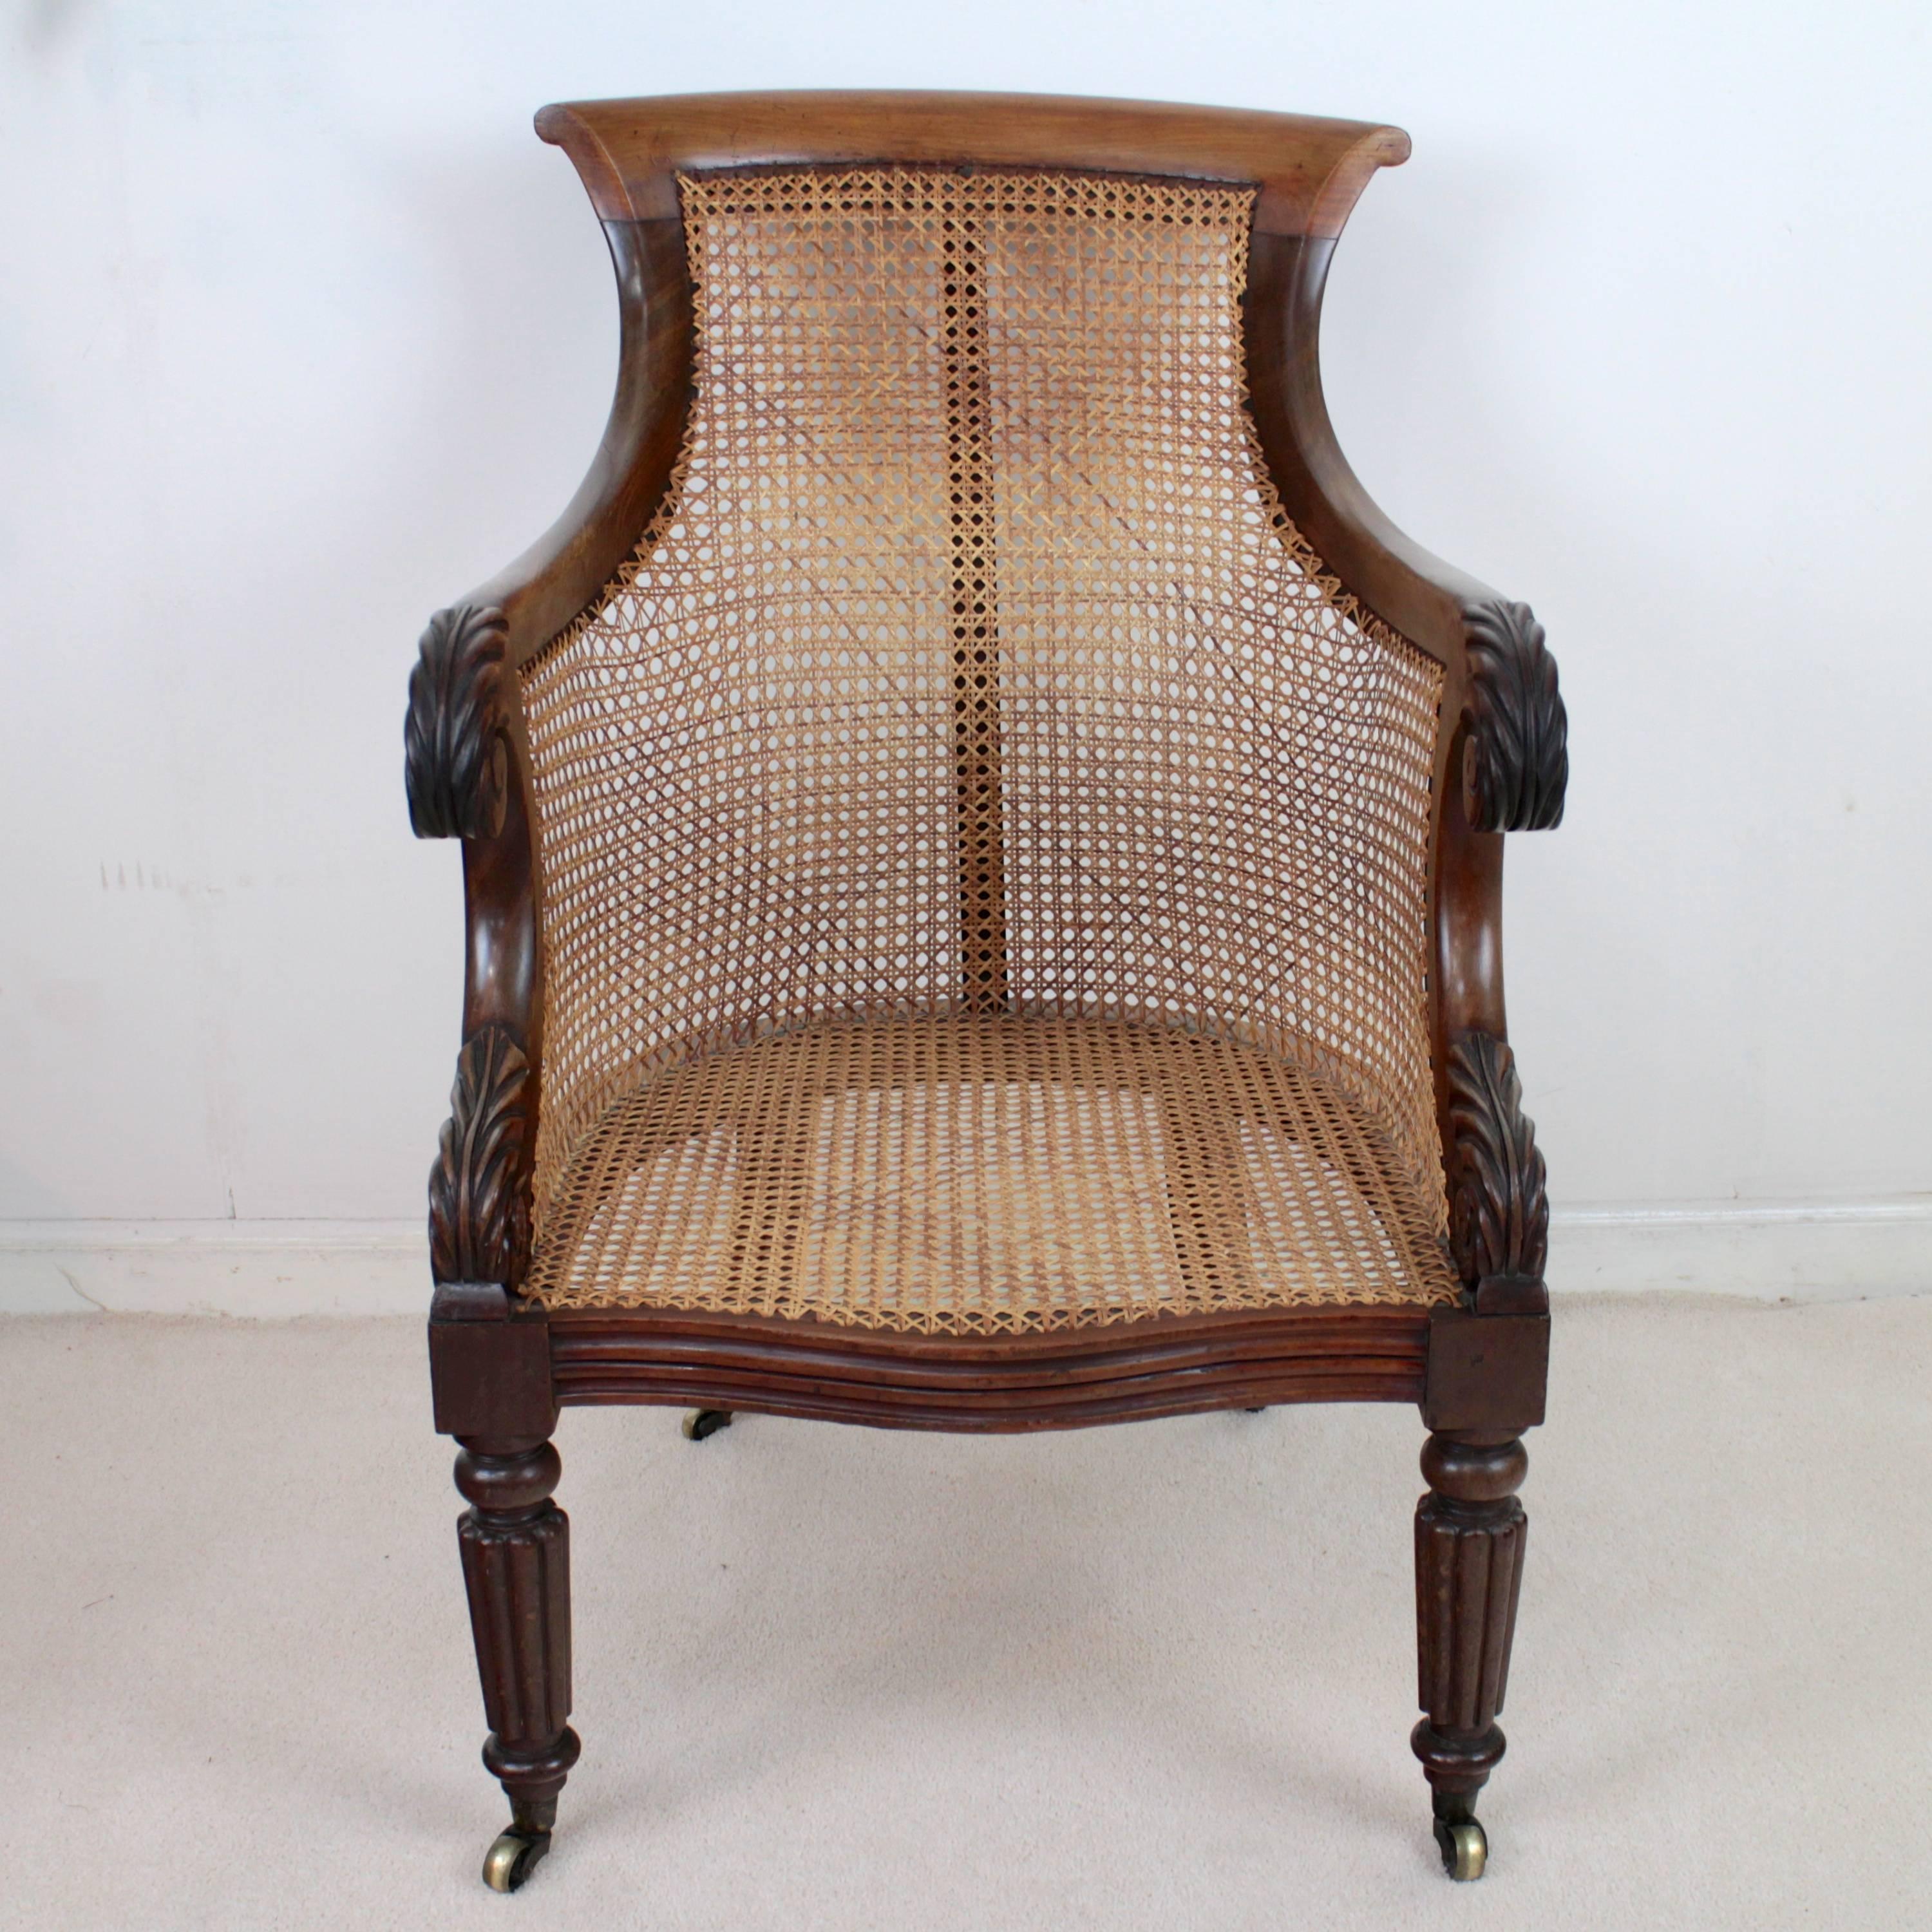 Brass Regency Mahogany and Cane Filled English Library or Bergère Chair